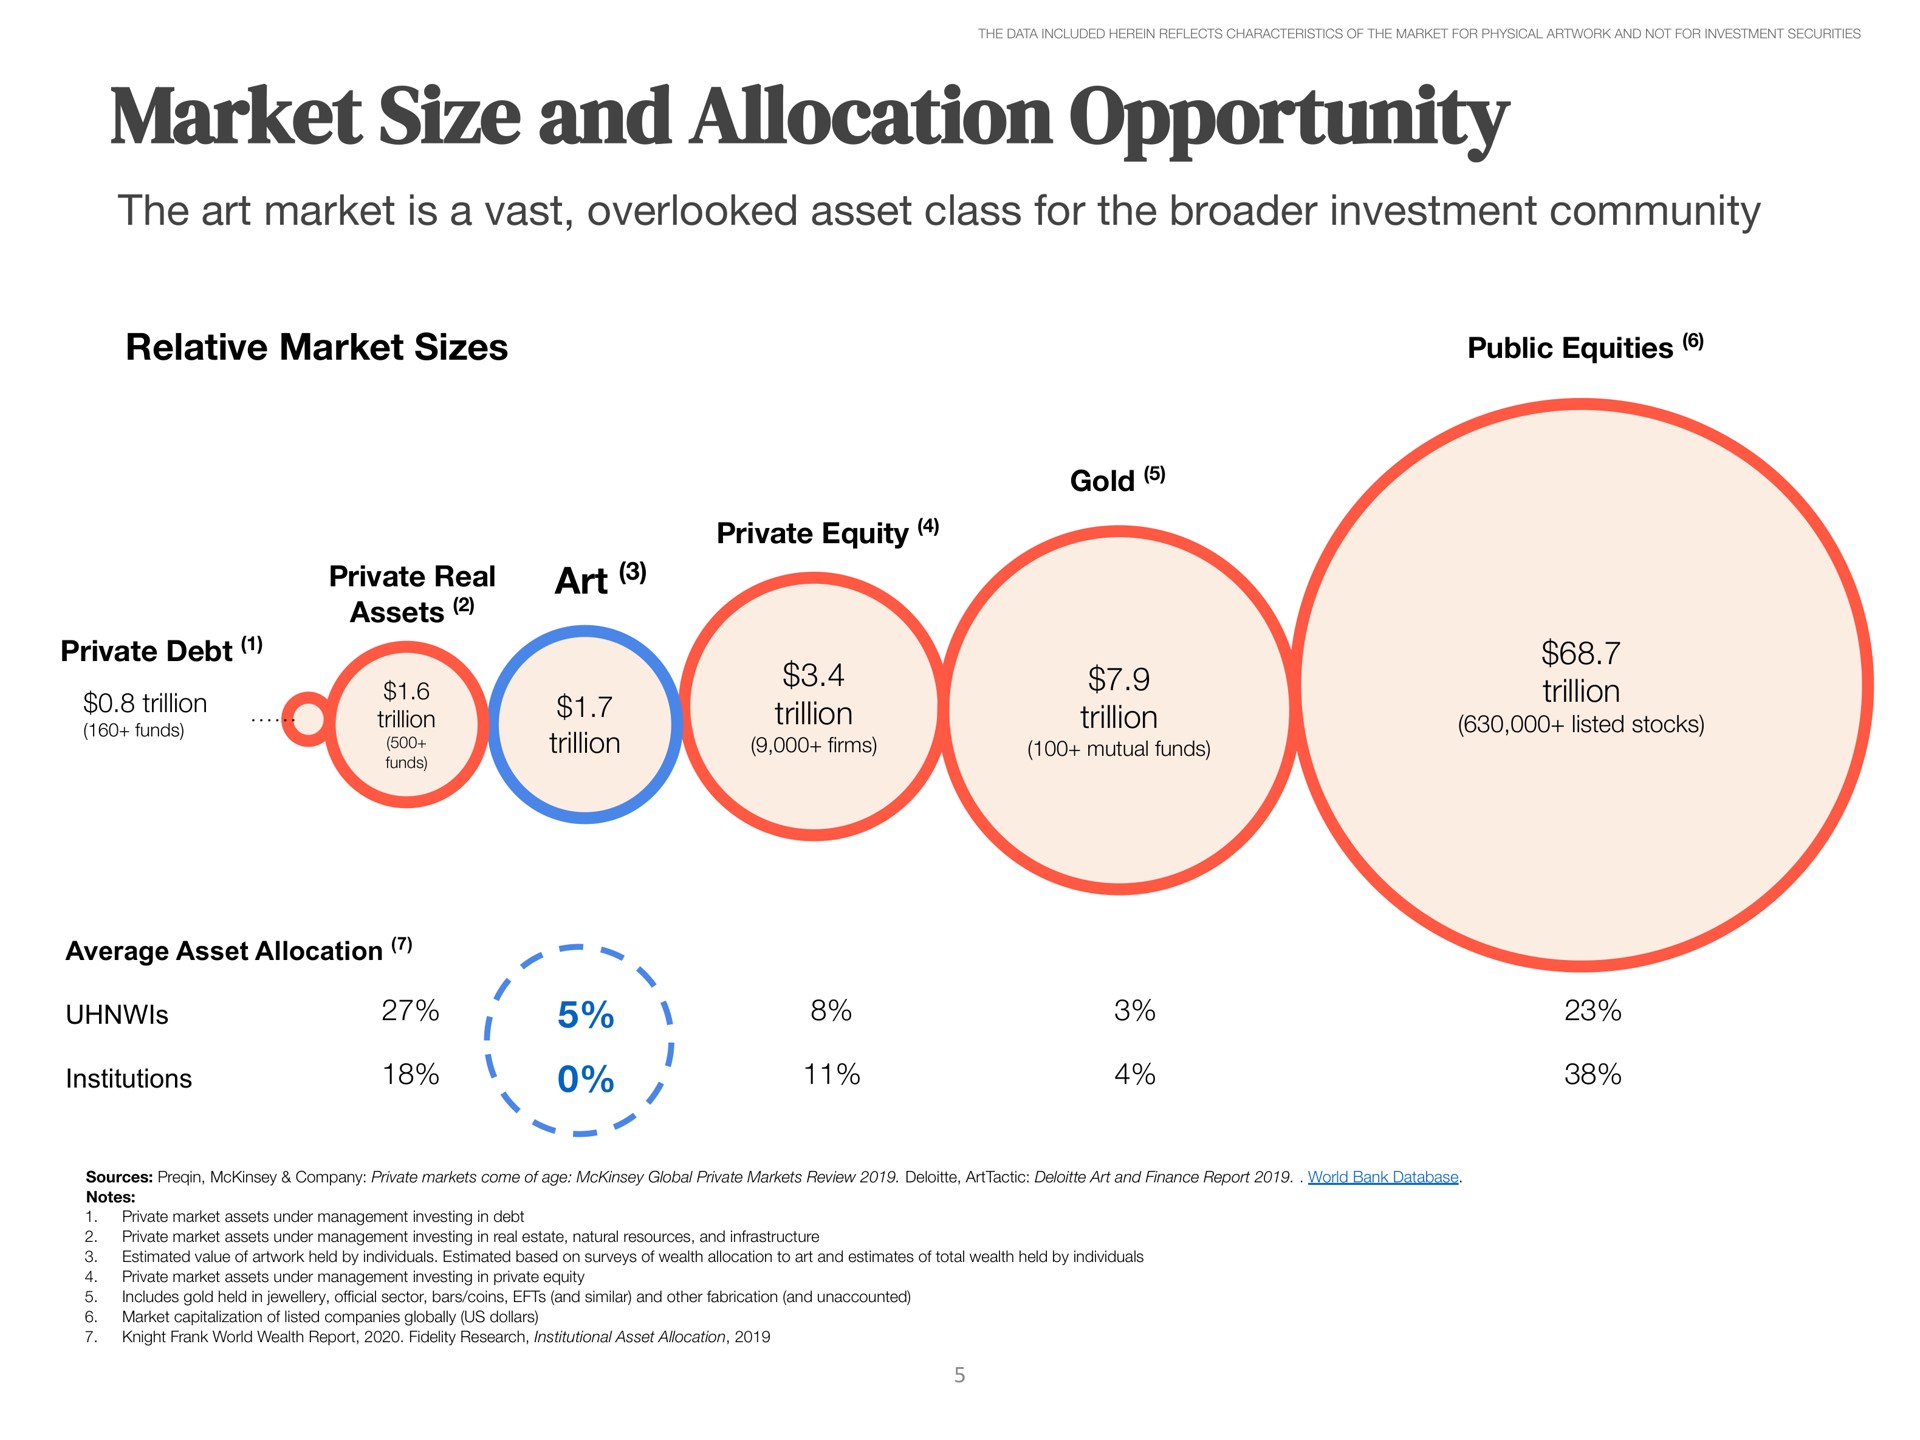 market size and allocation opportunity the art market is a vast overlooked asset class for the investment community relative market sizes art | Masterworks